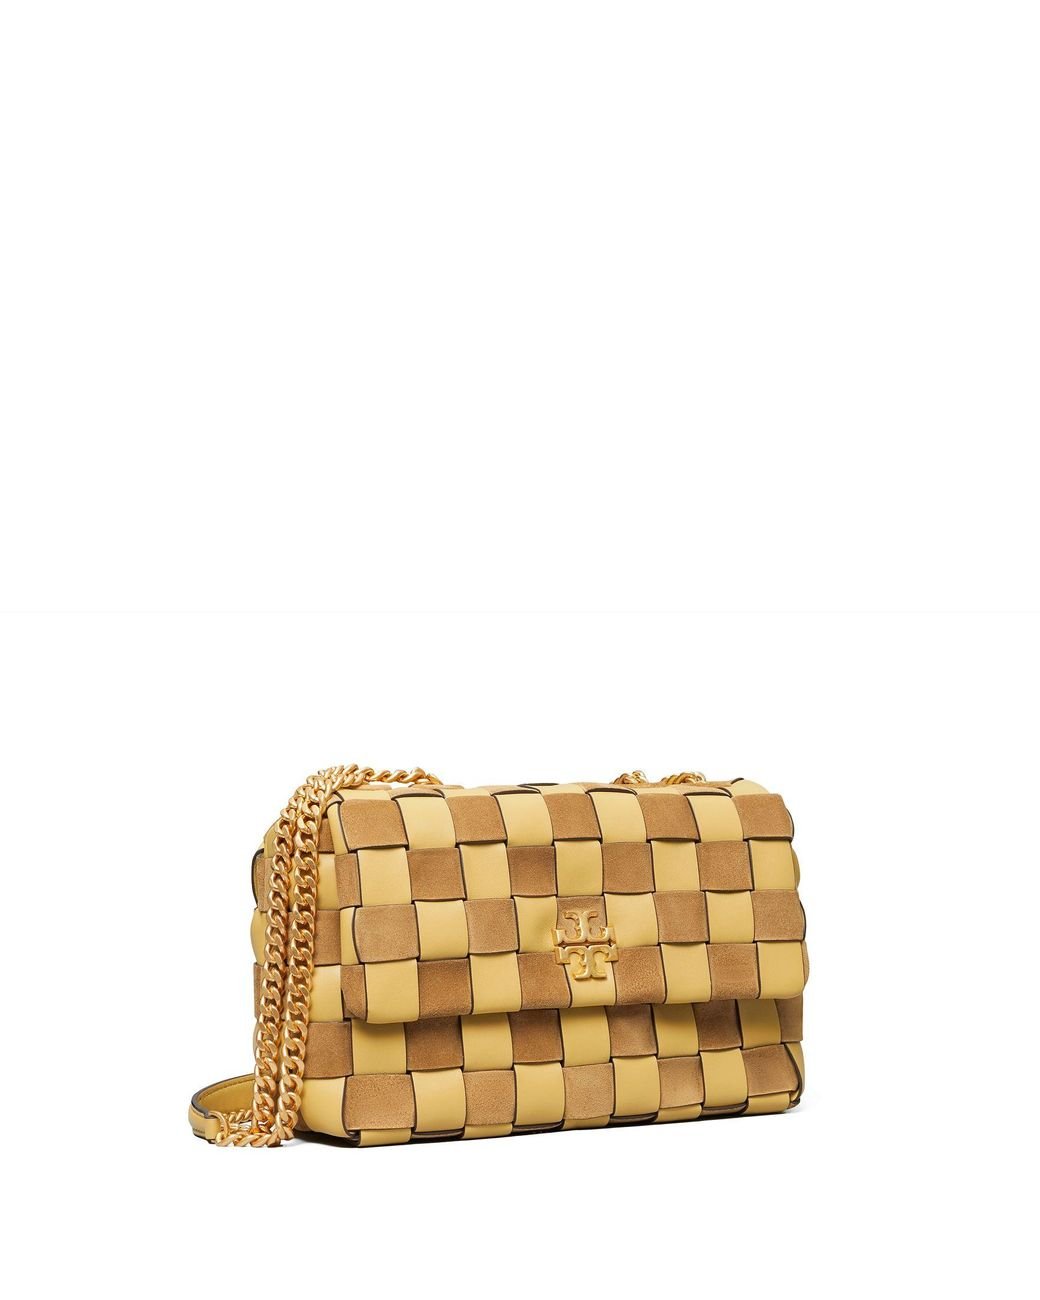 Tory Burch Leather Kira Woven Small Convertible Shoulder Bag | Lyst UK